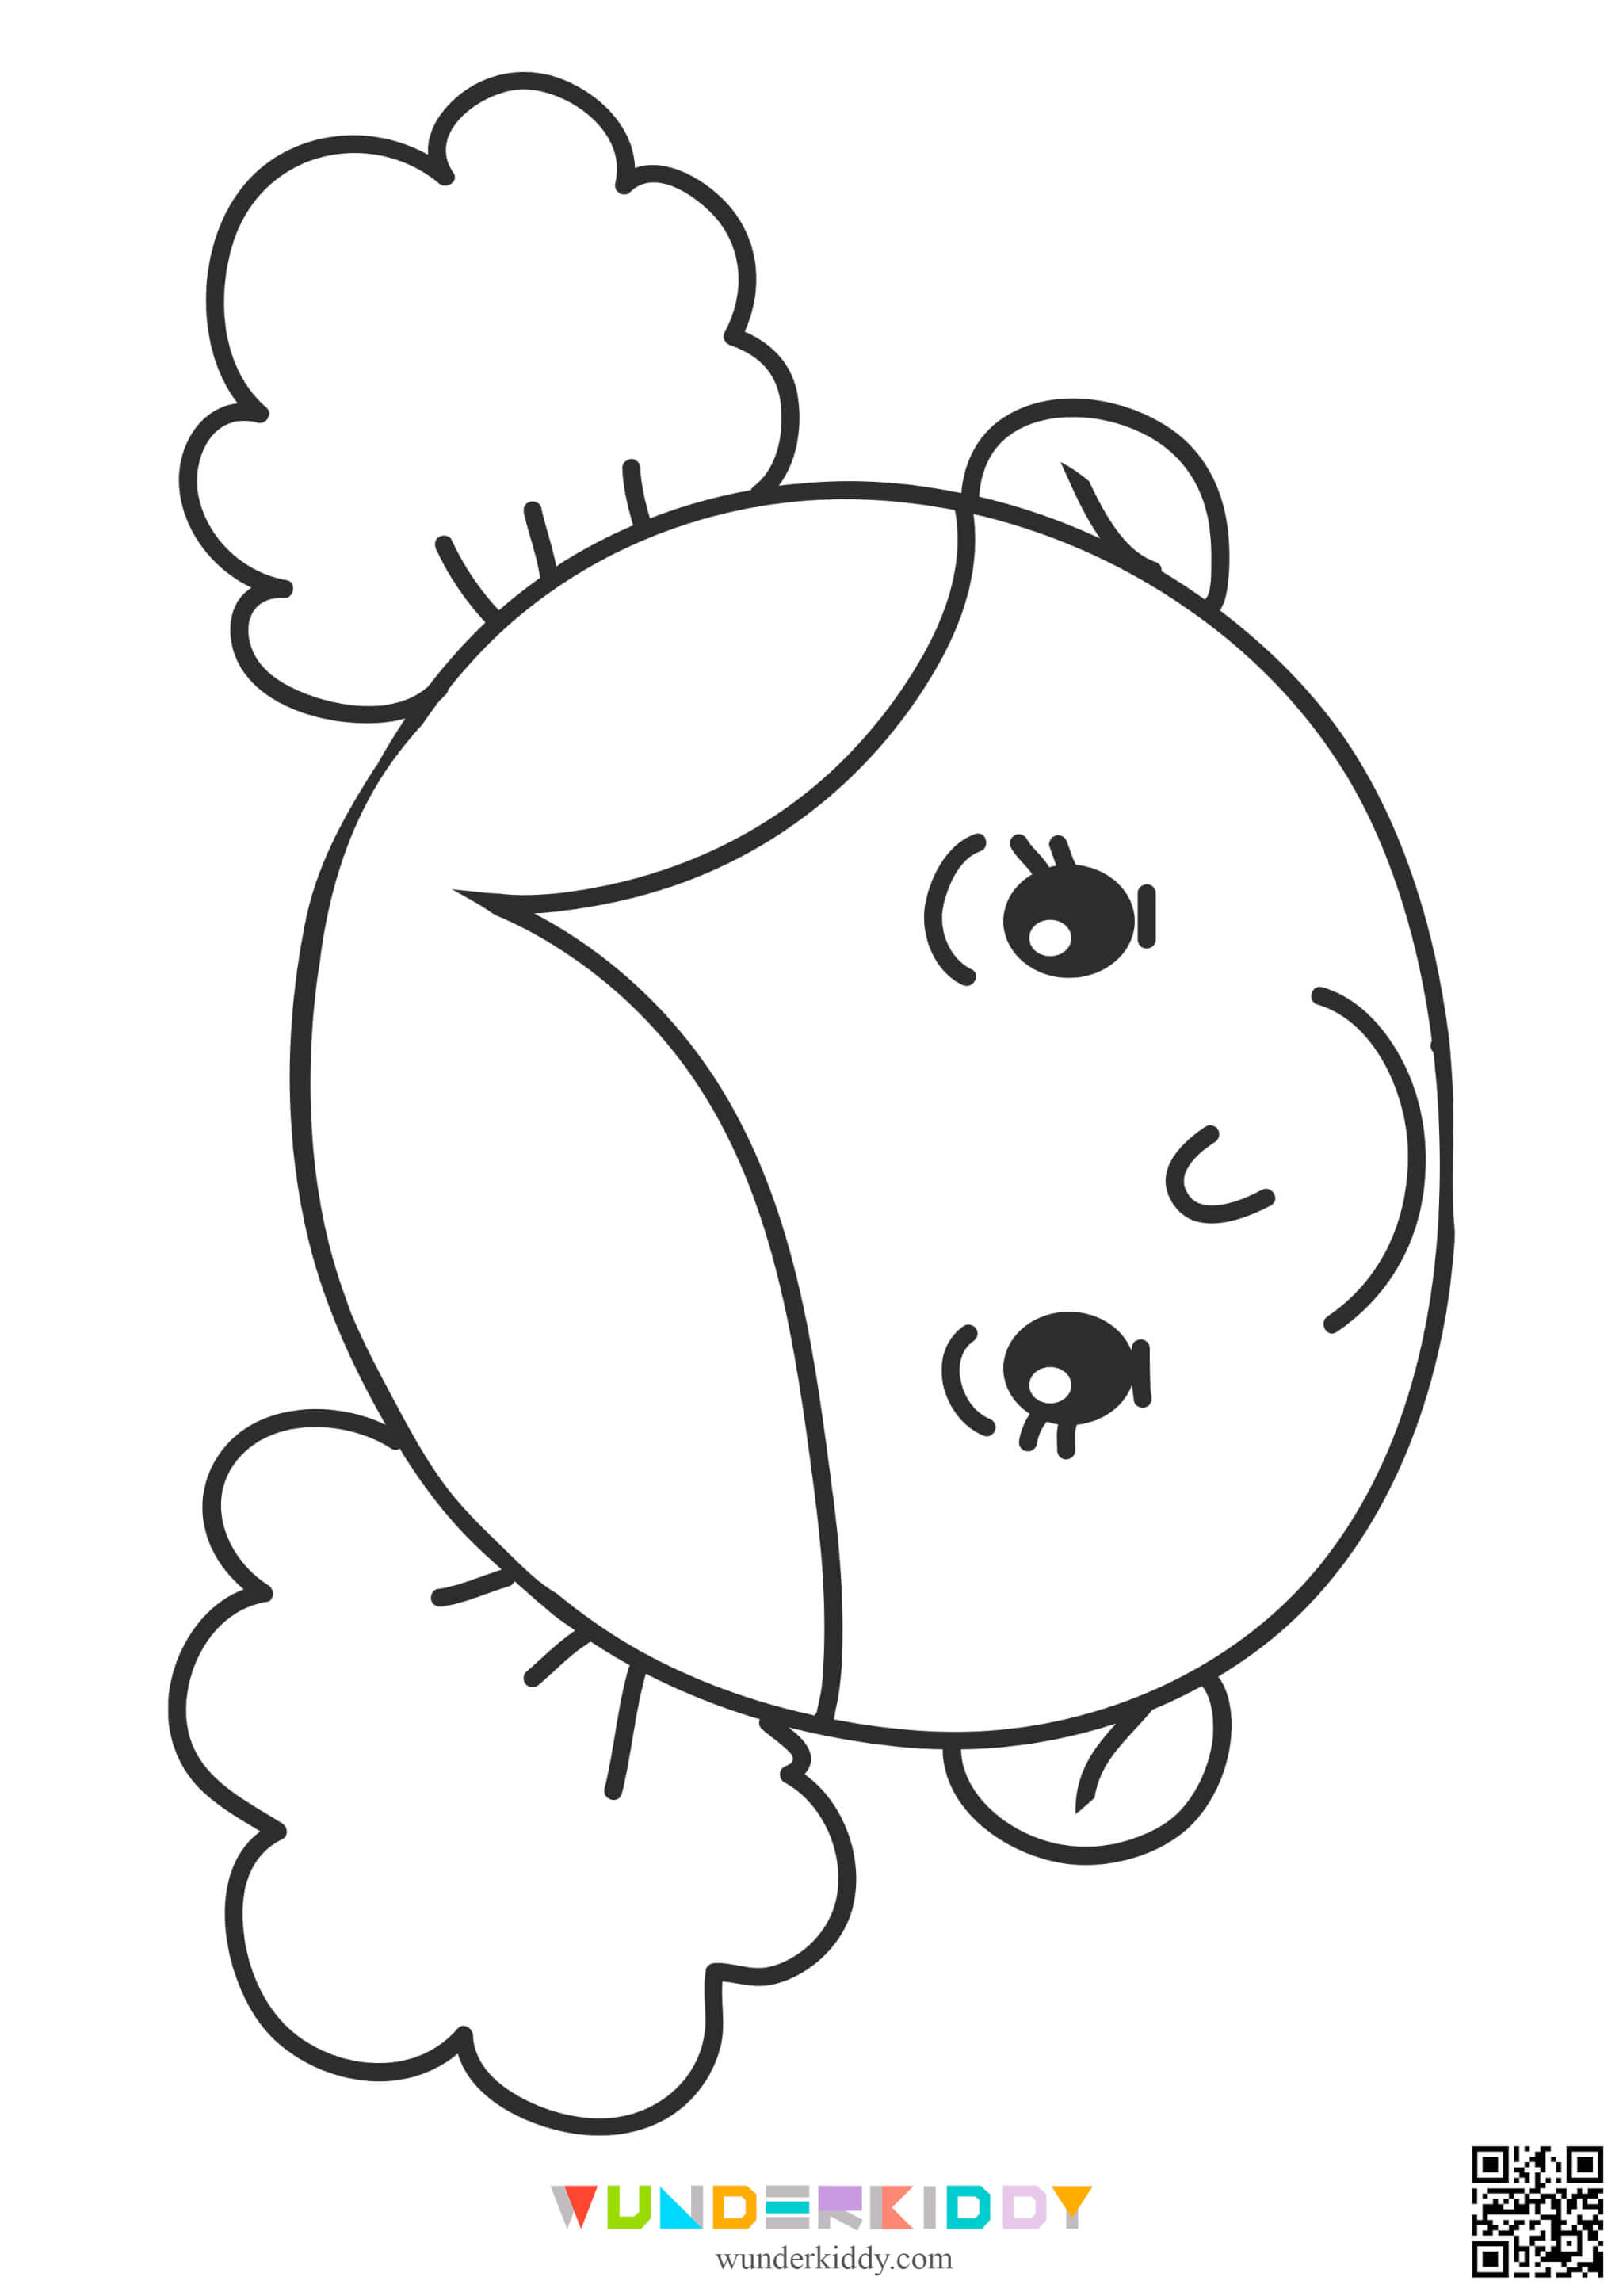 Face Coloring Page - Image 11